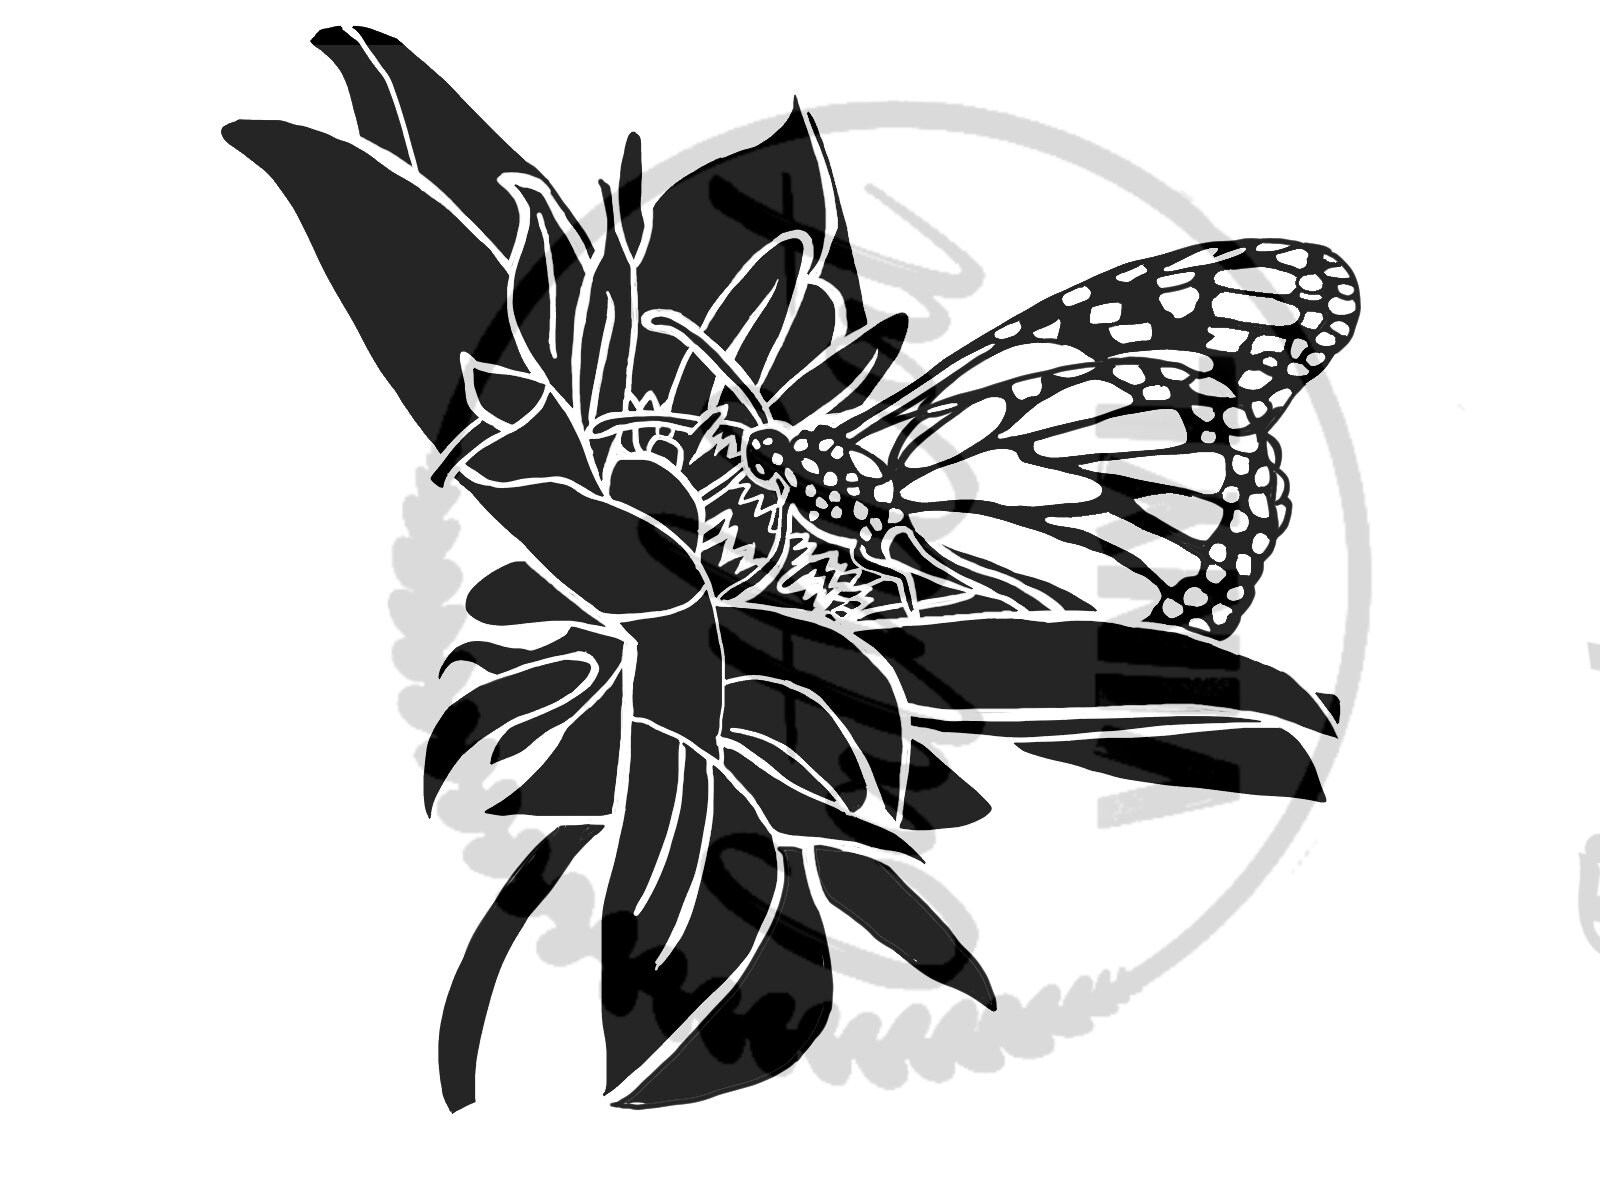 BUTTERFLY WITH ROSES - SVG / PDF / DXF – DuperCut